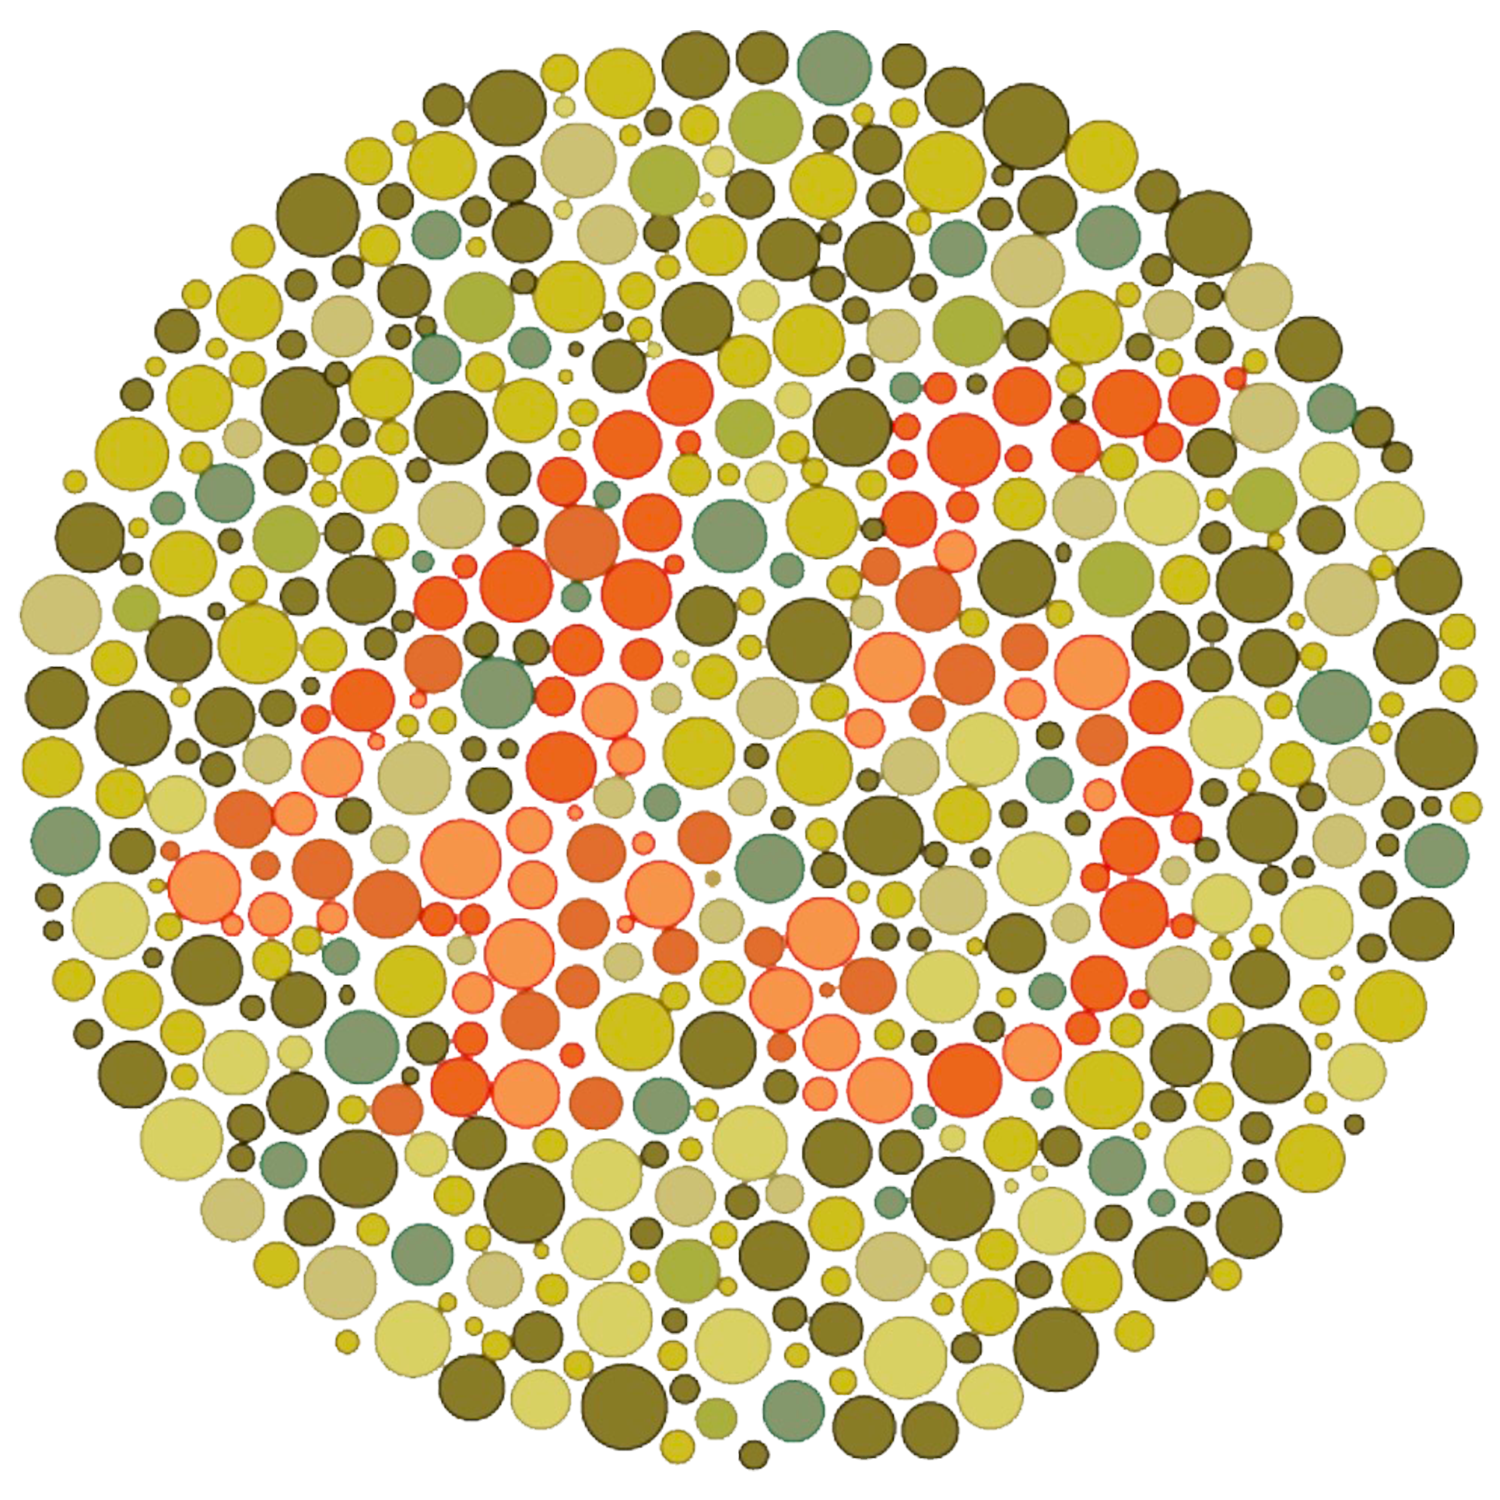 color-vision-screening-ishihara-test-mdcalc